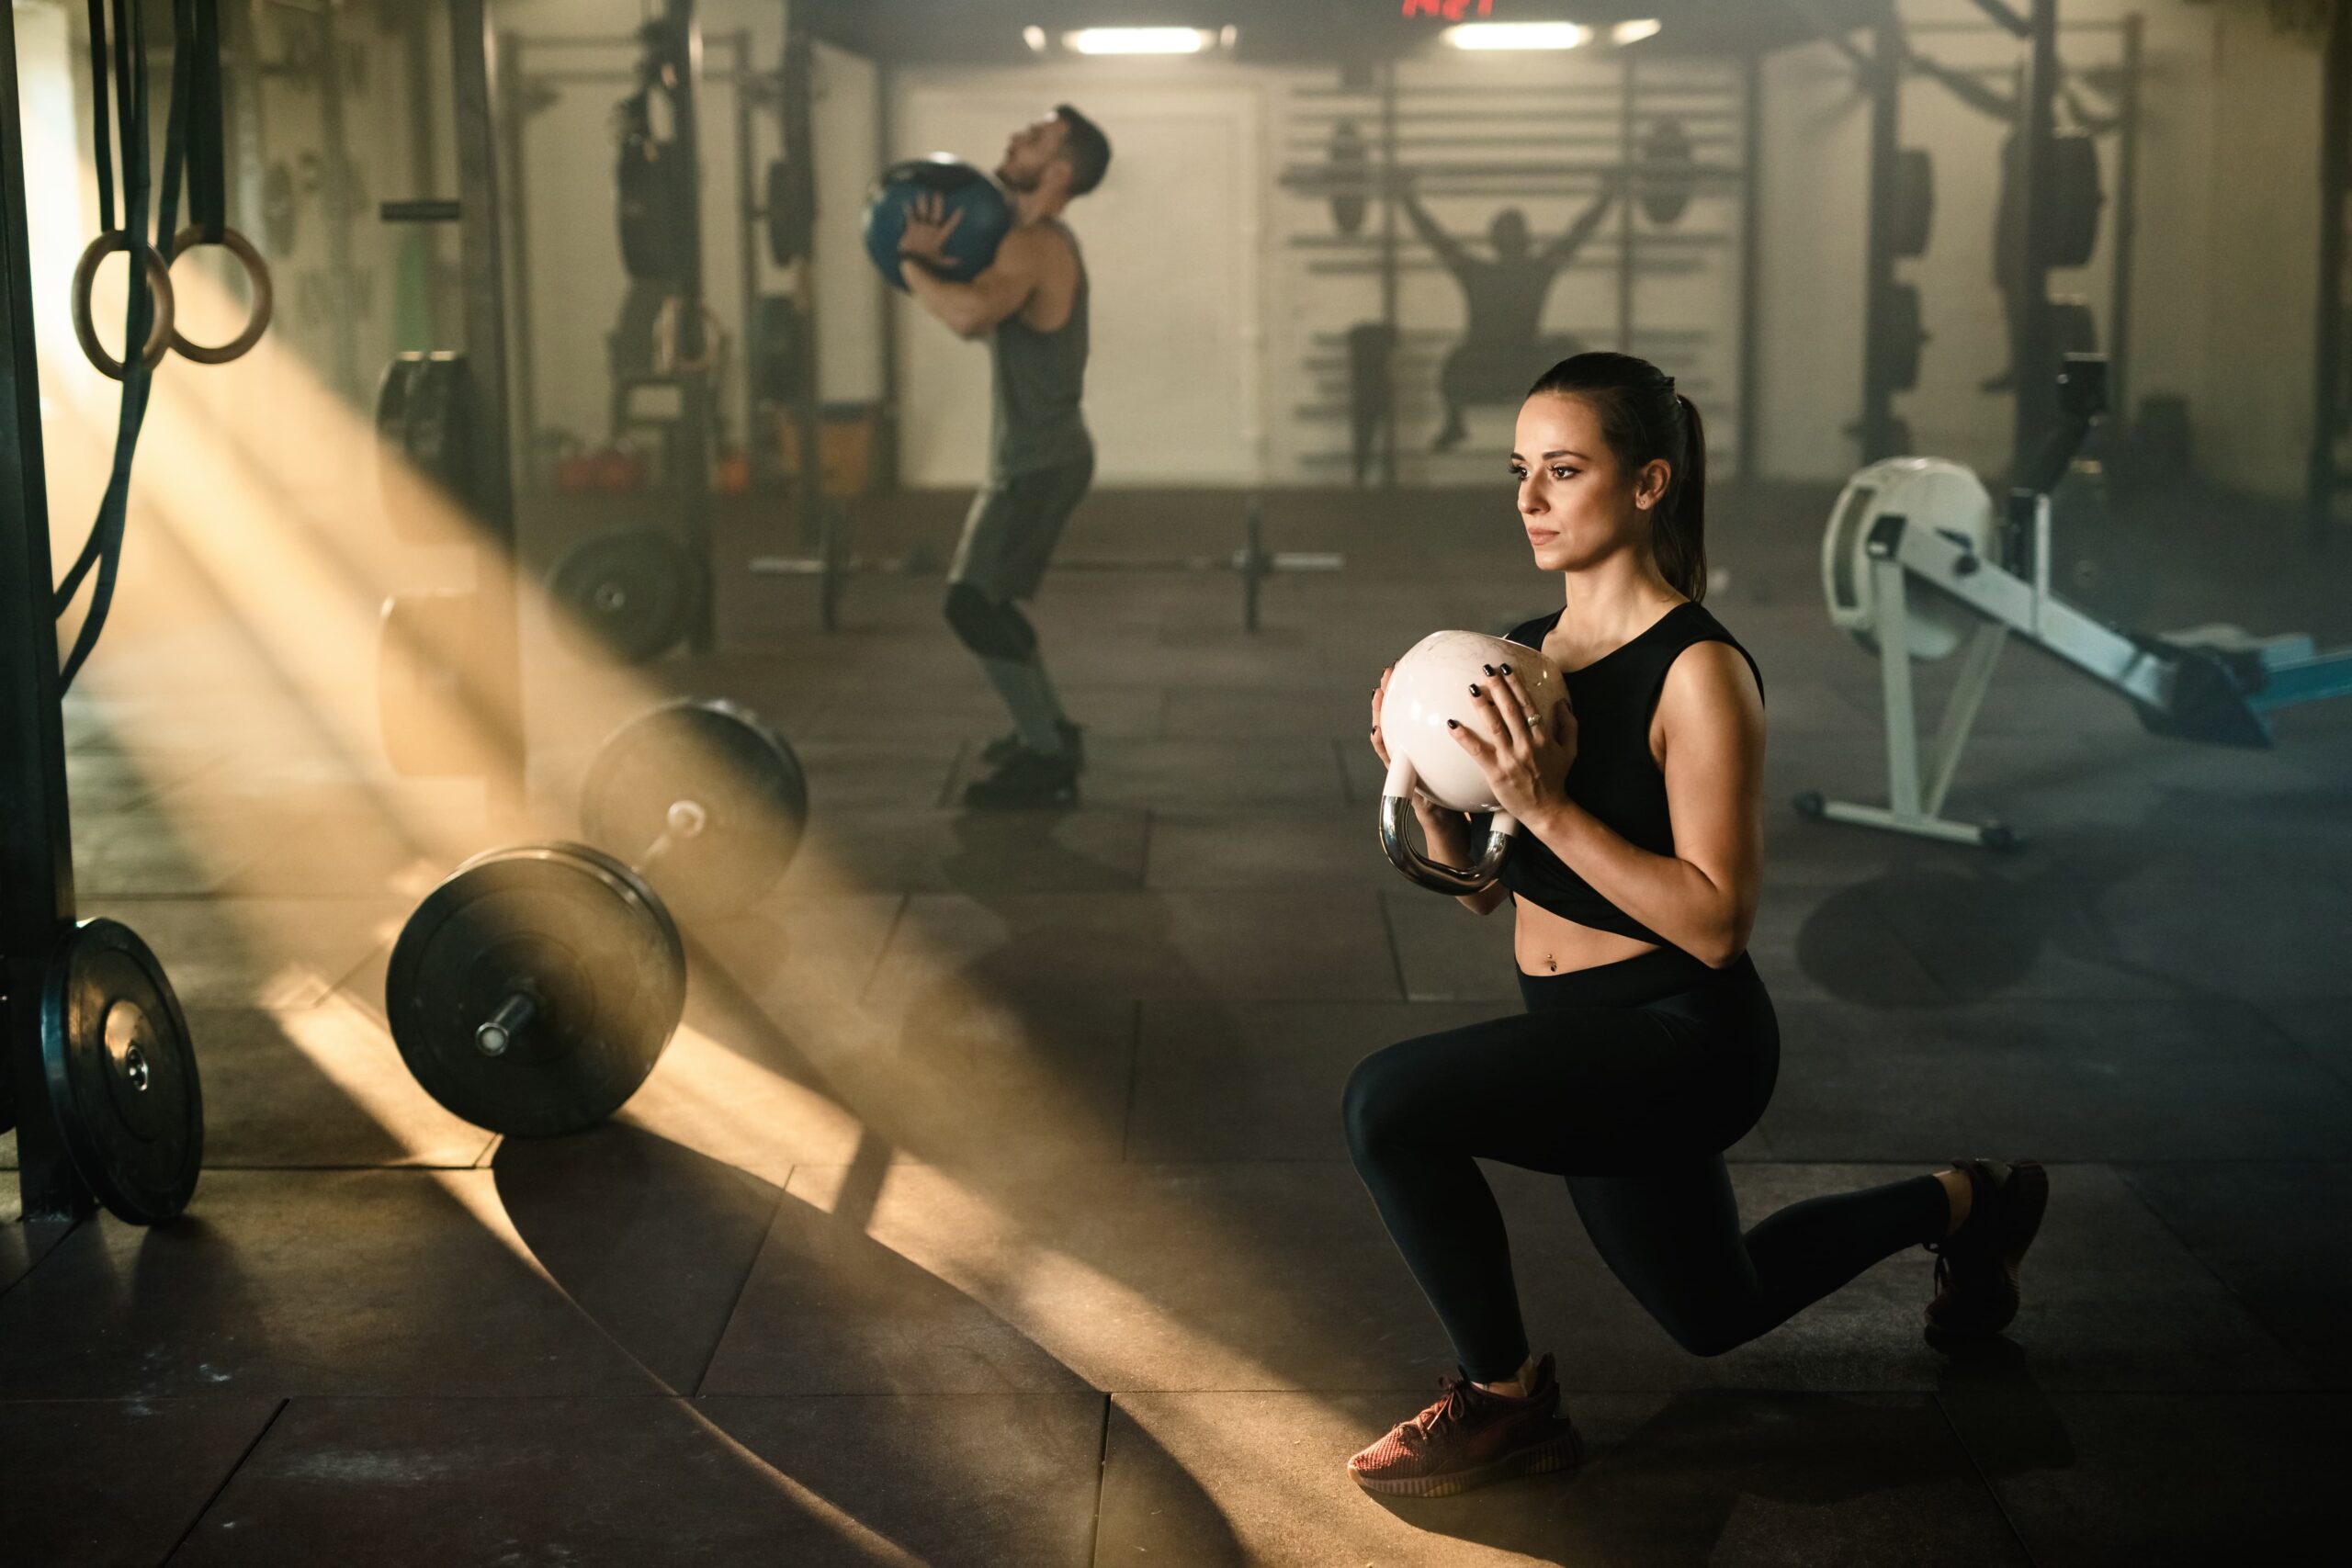 Three Amazing Health Benefits Of Circuit Training You Didn’t Know